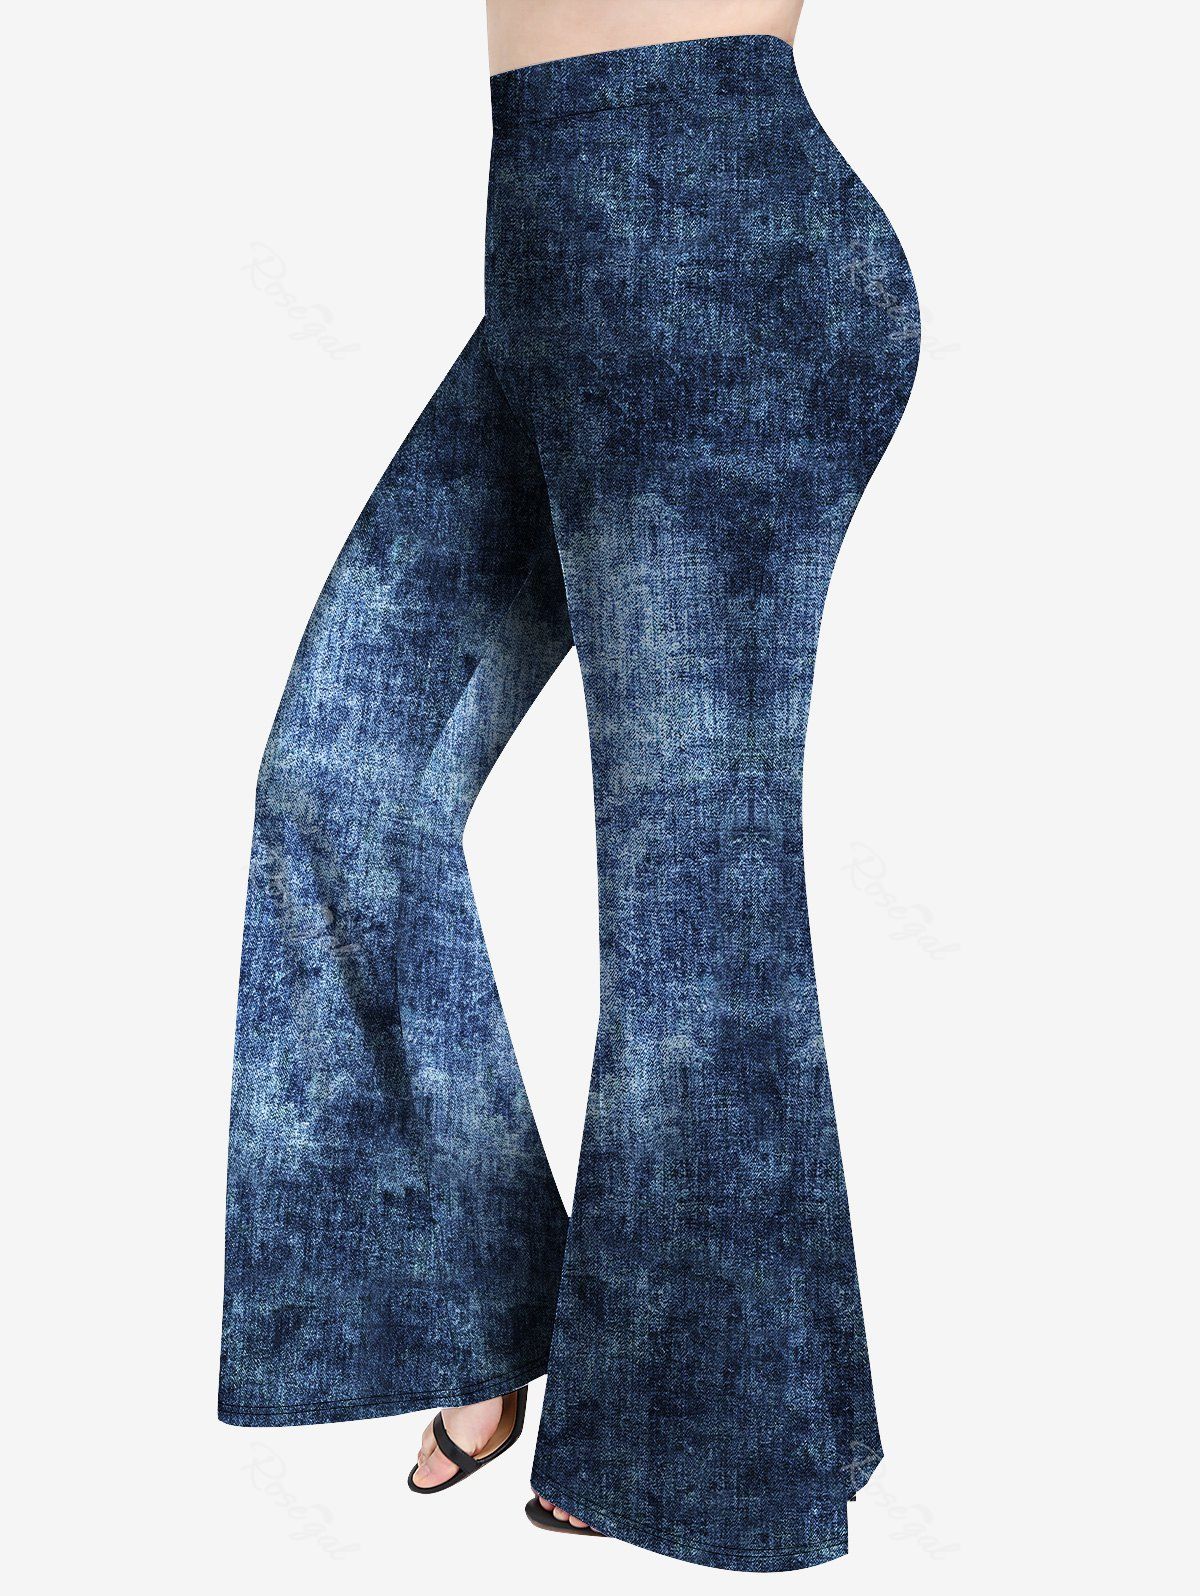 New Plus Size 3D Jean Print Pull On Flare Pants  